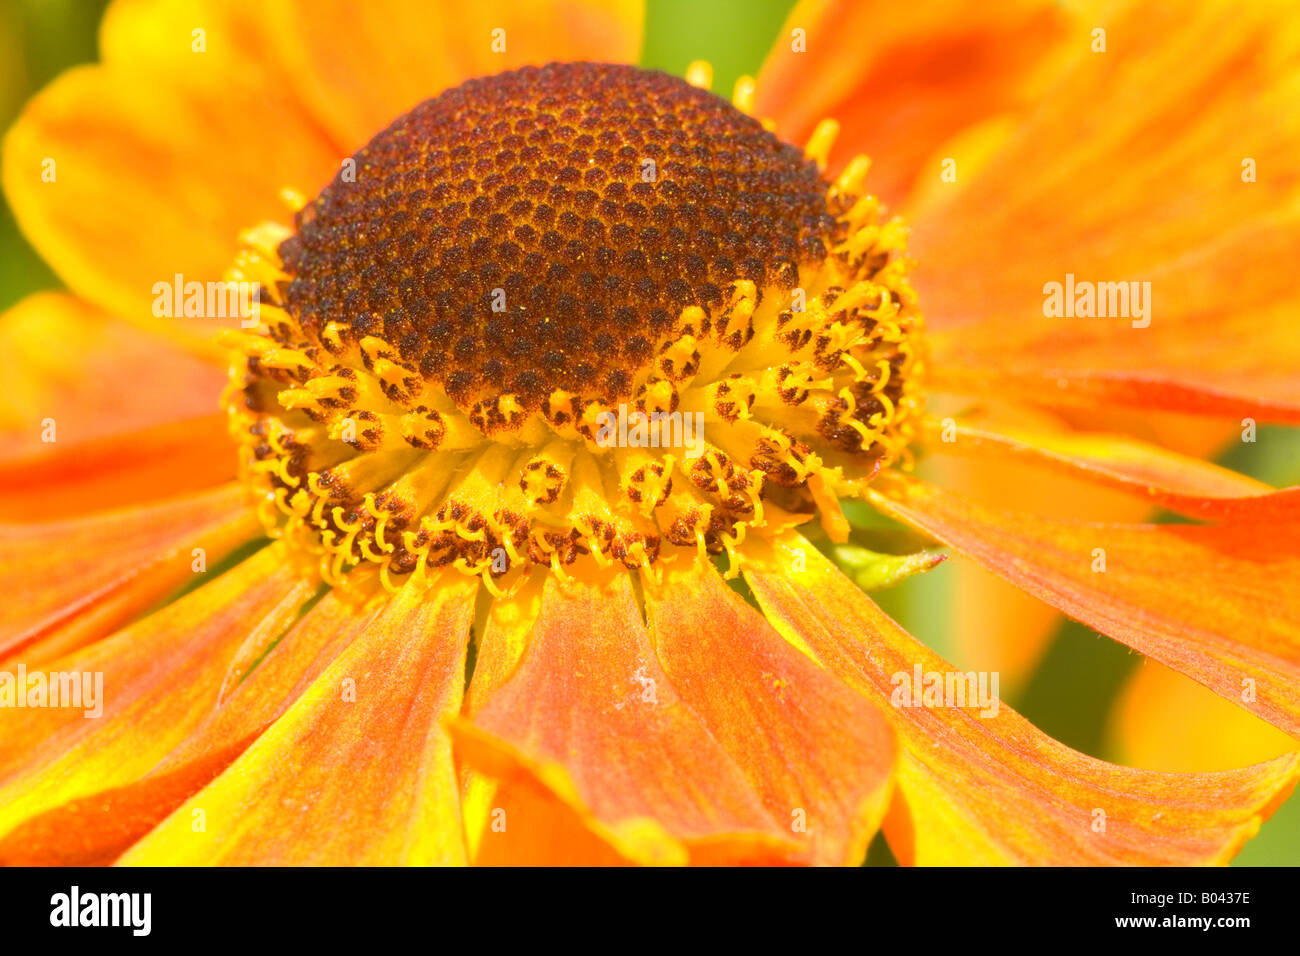 blossom detail of a yellow and red coloured Helenium Germany Stock Photo